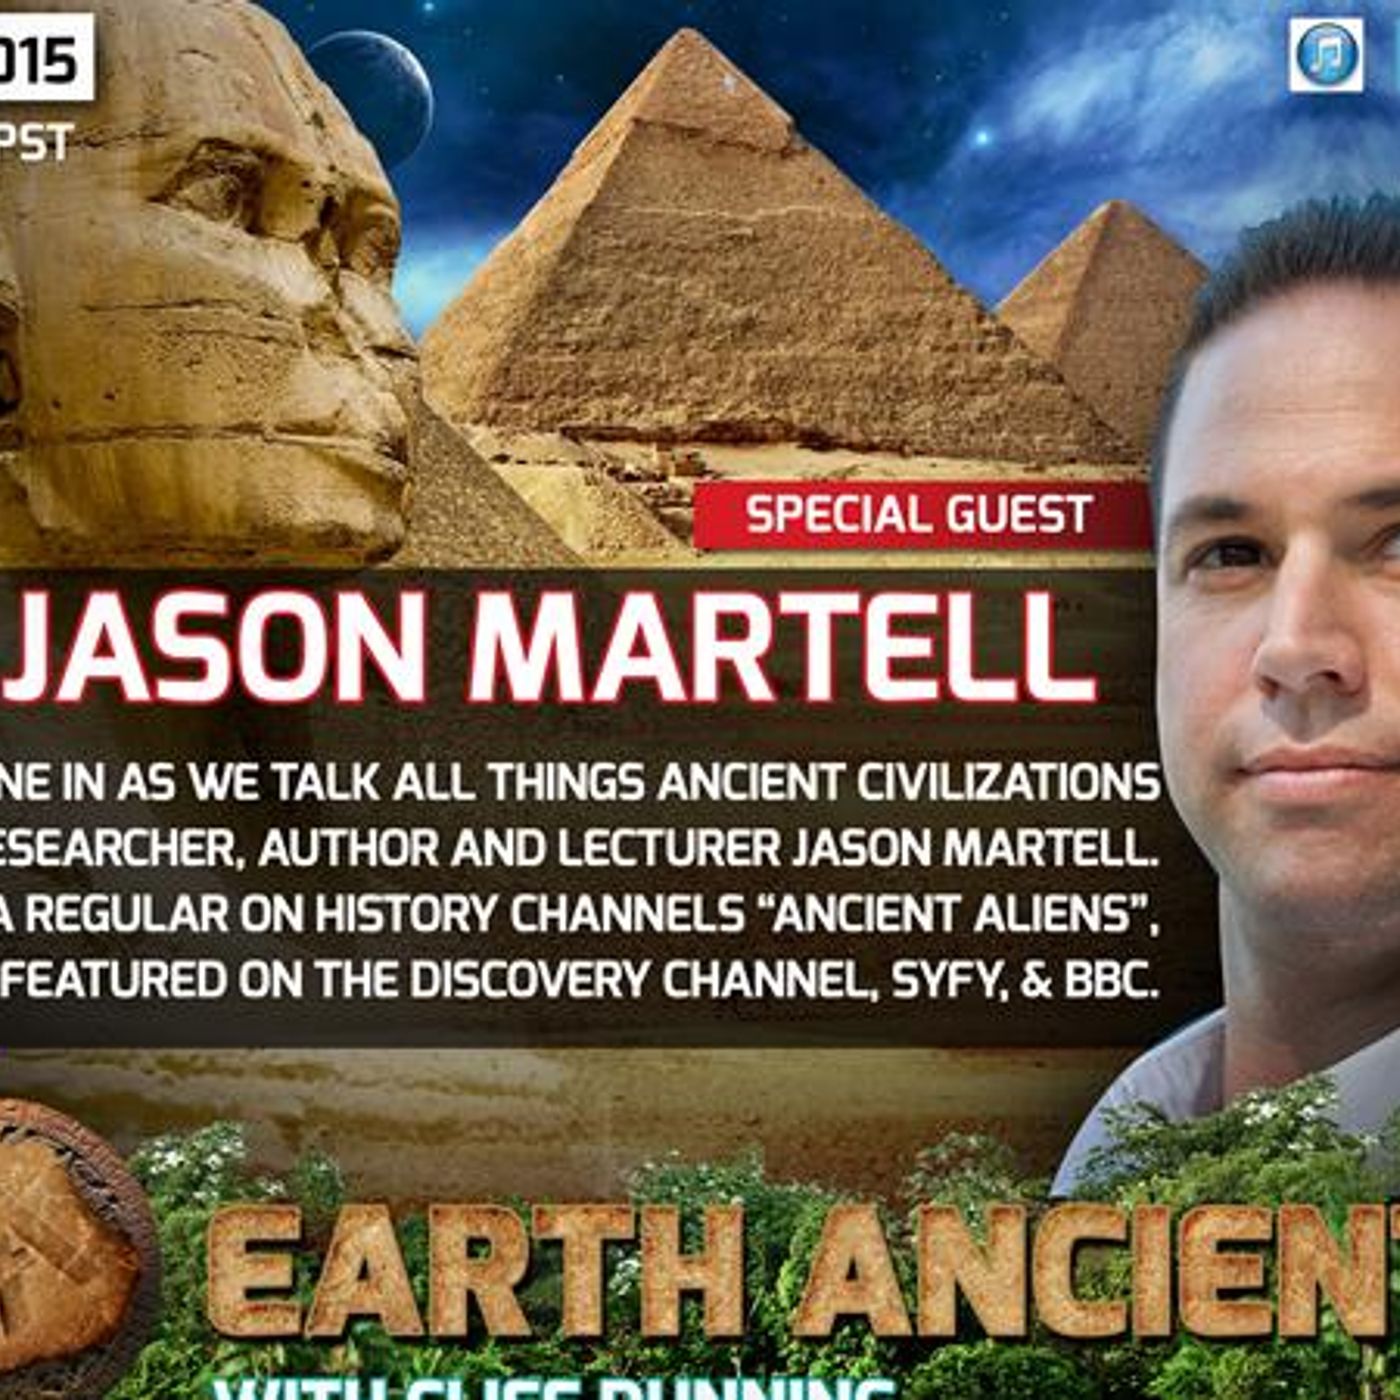 Jason Martell: Science & Technologies of the Ancients